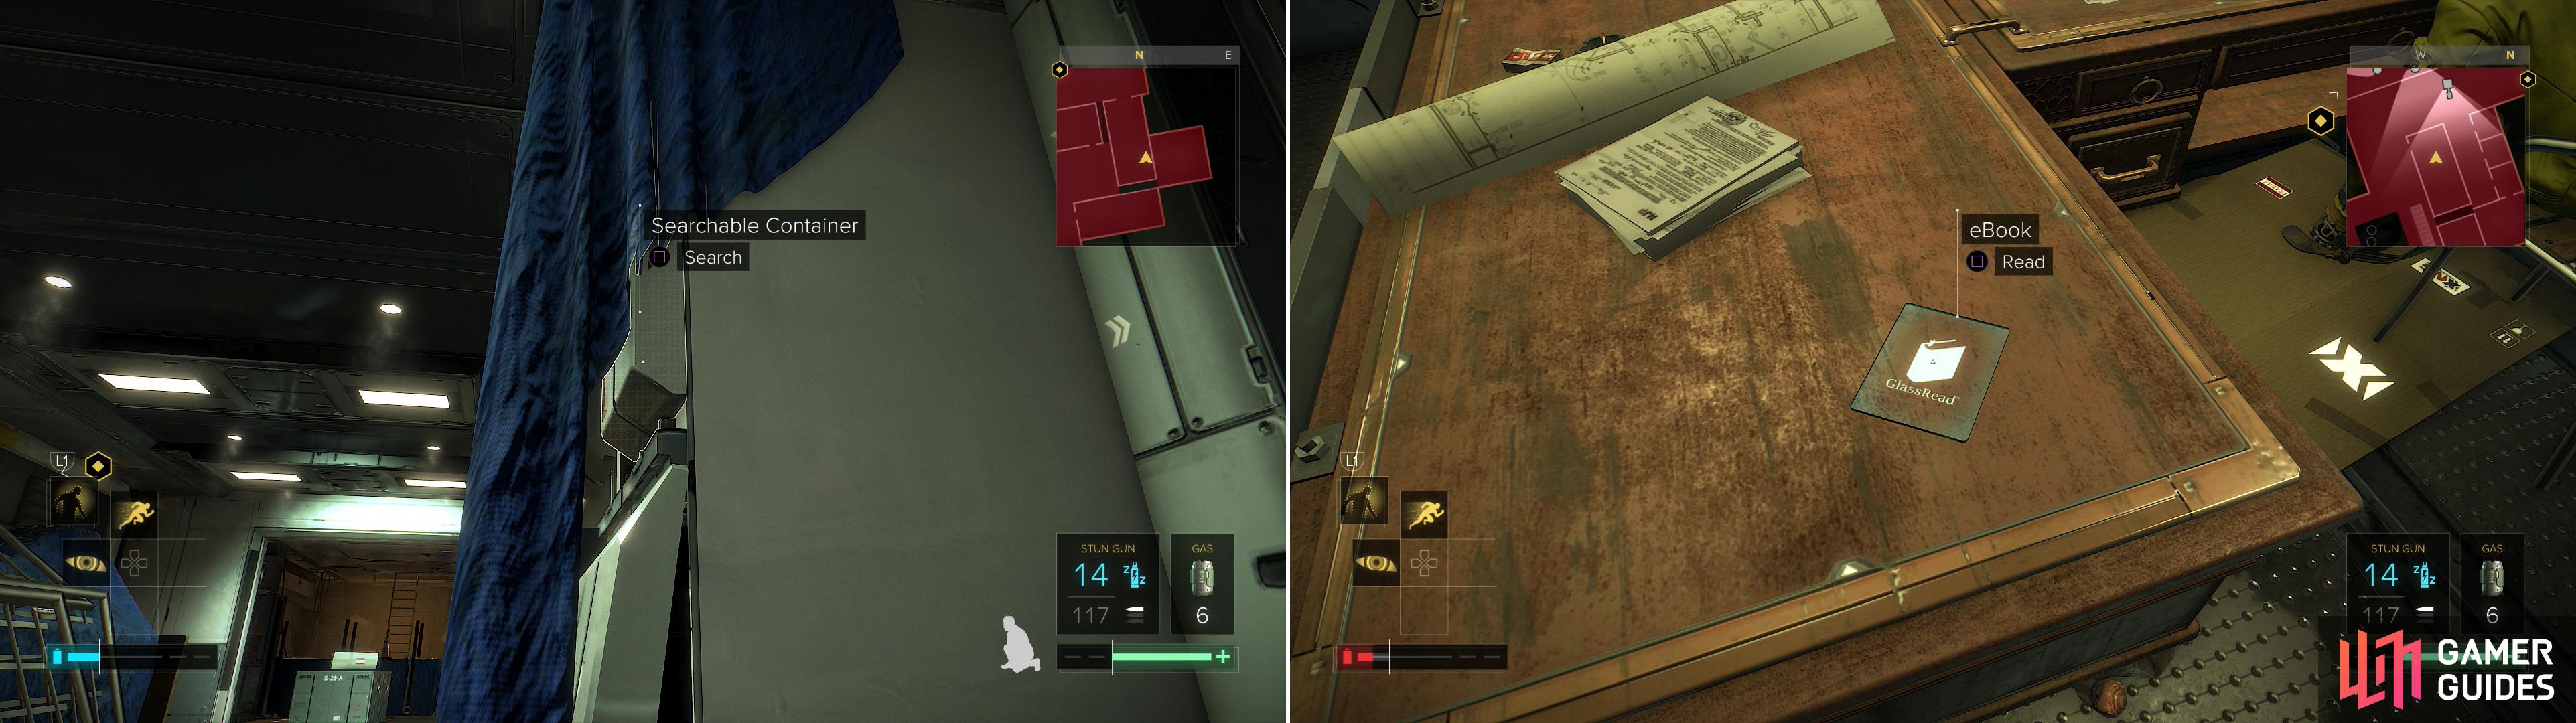 In a well-hidden Searchable Container you'll find a Praxis Kit (left). Be sure to surgically dispatch the ARC Soldiers so you can lay your hands on some collectibles (right).